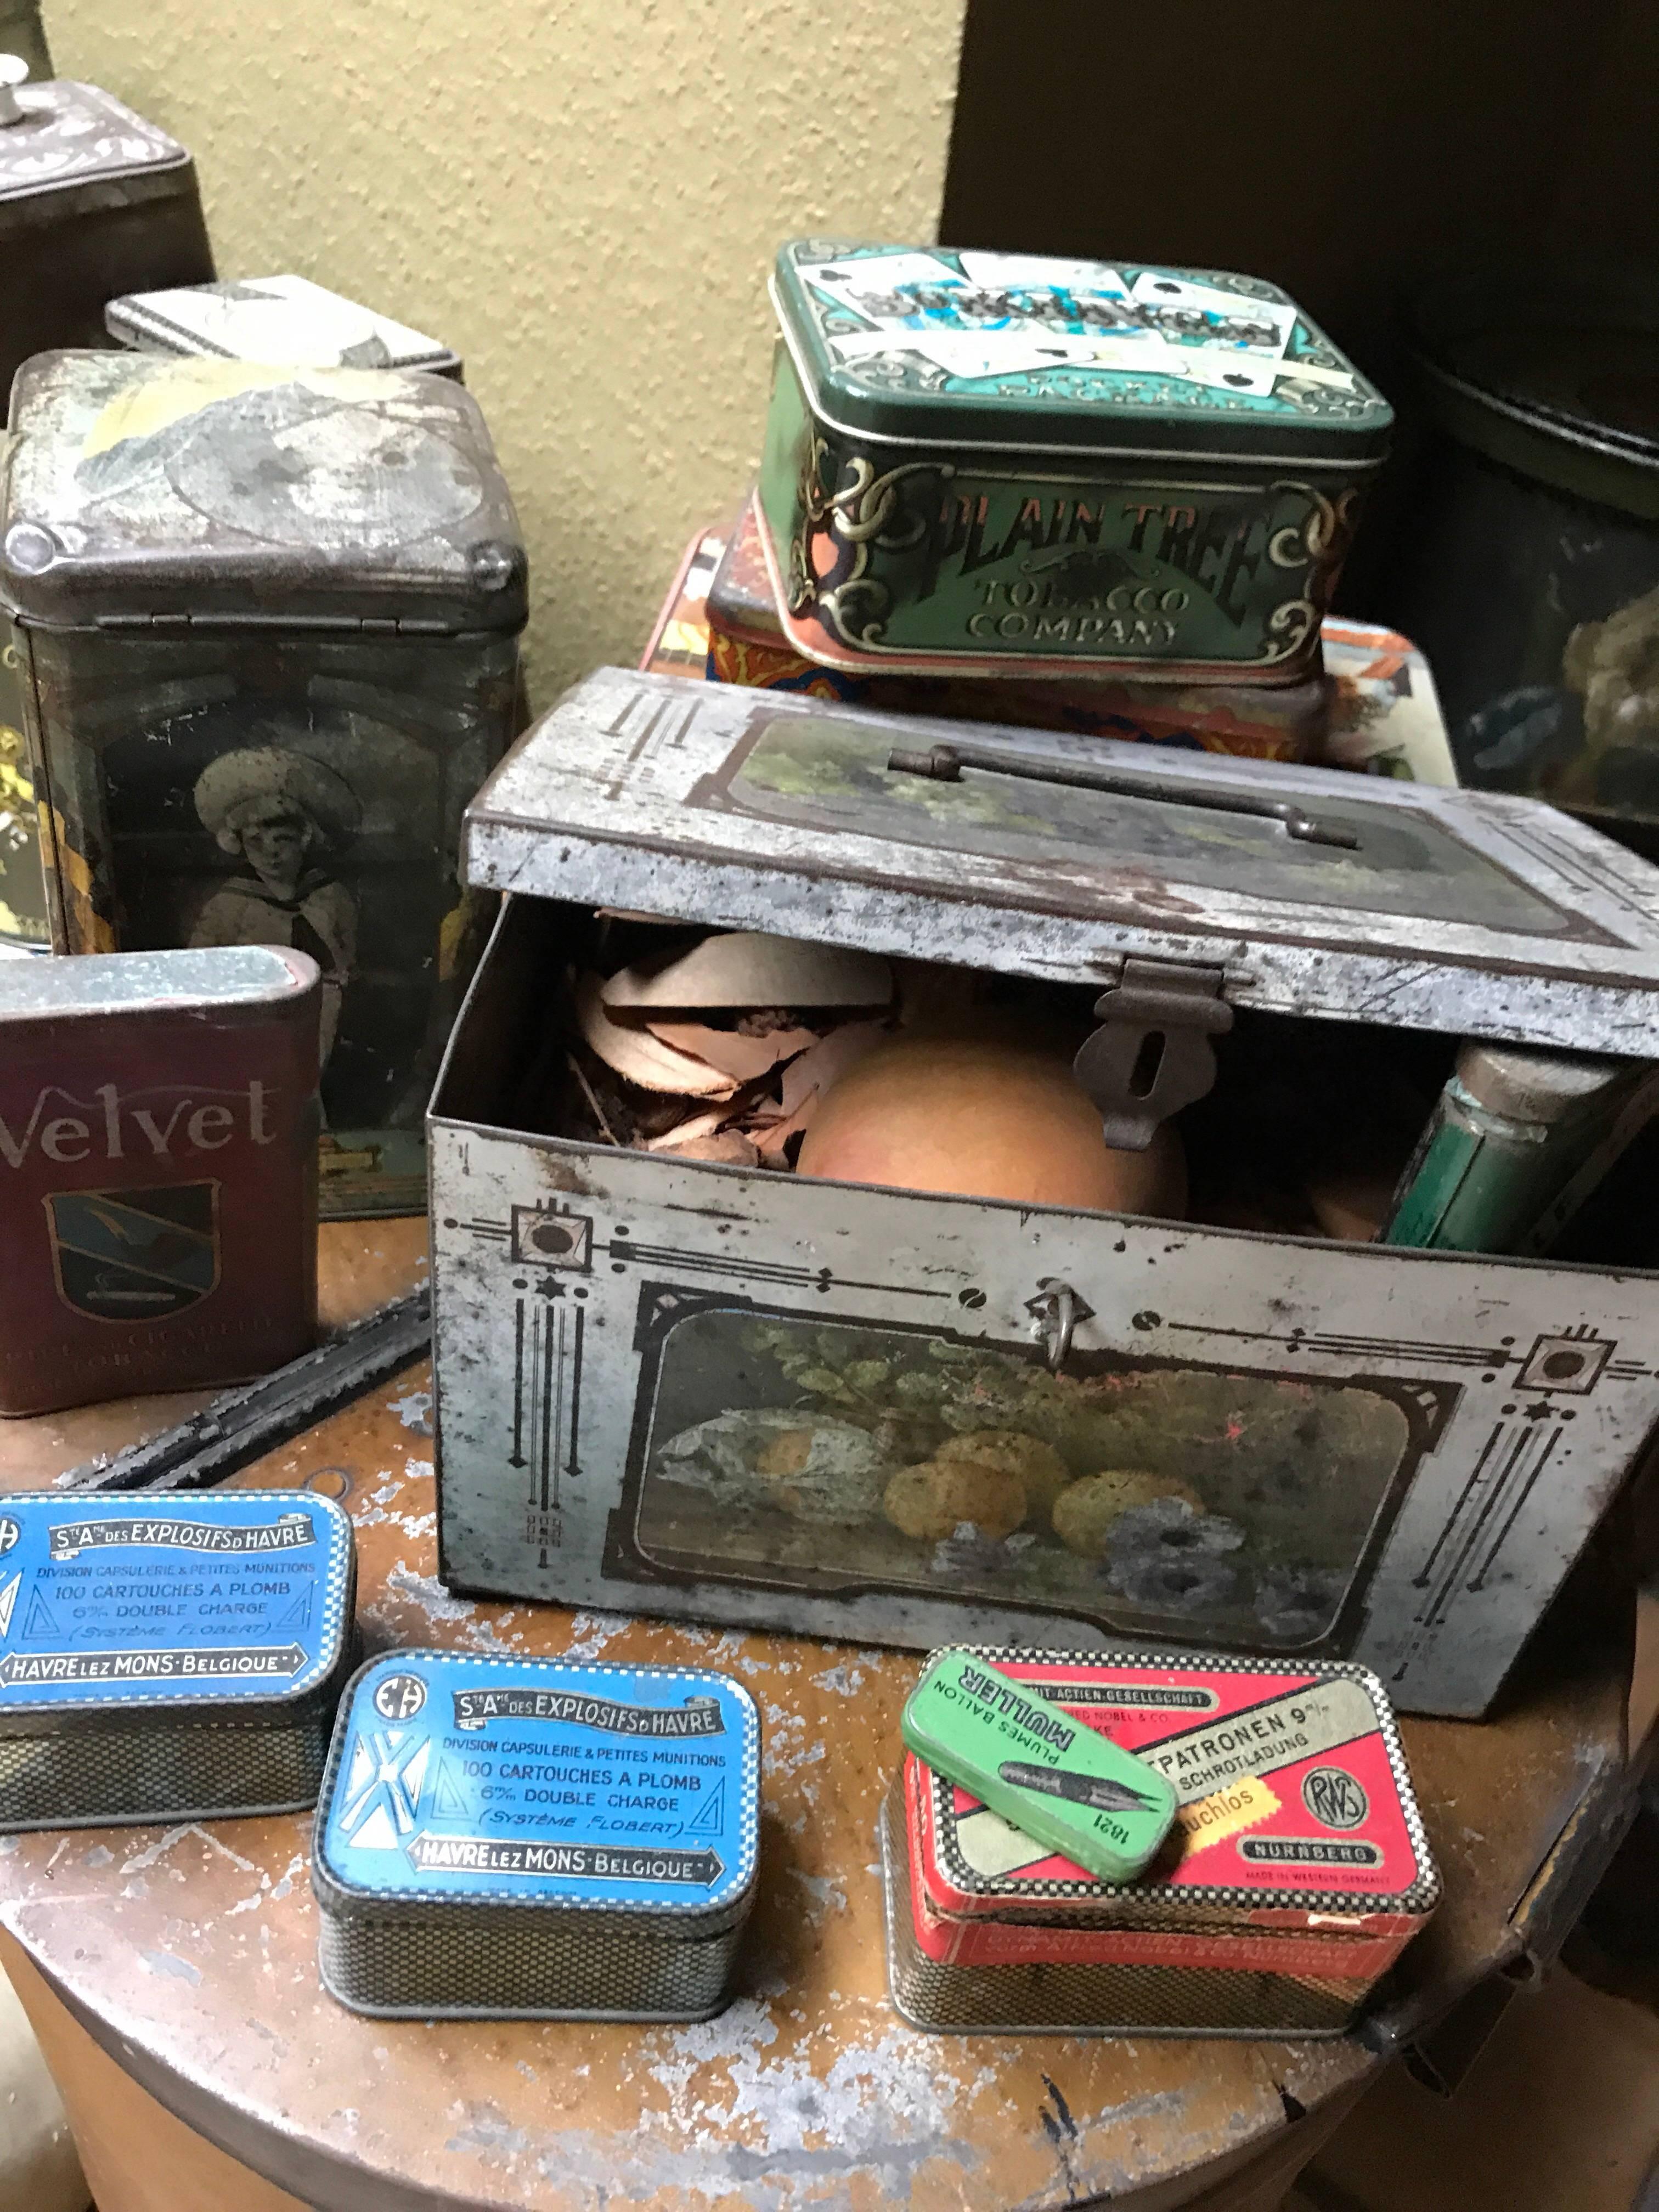 Wonderful and crazy such a collection of "tins"
circa 1900
Tins for food, wax, bullets, coffee, tea, candy, flower etc .......
and a tin duck beautiful 
with respect off age and little defaults of time. 

